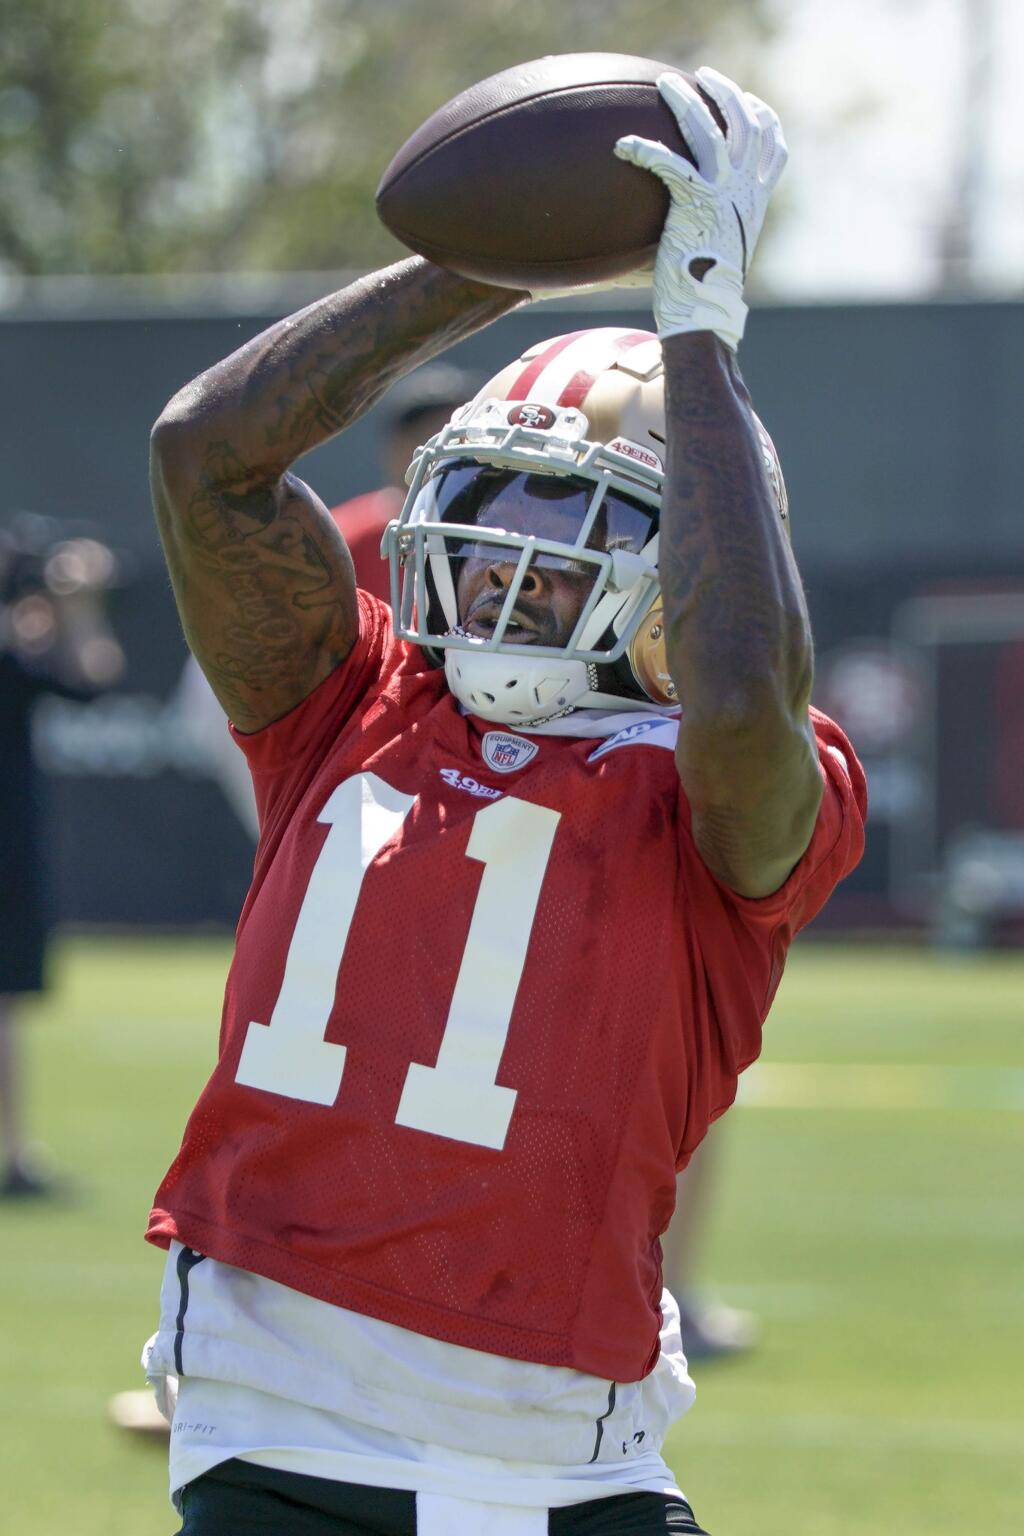 San Francisco 49ers wide receiver Marquise Goodwin catches a pass during a drill at the team's training facility in Santa Clara, Tuesday, June 11, 2019. (AP Photo/Tony Avelar)